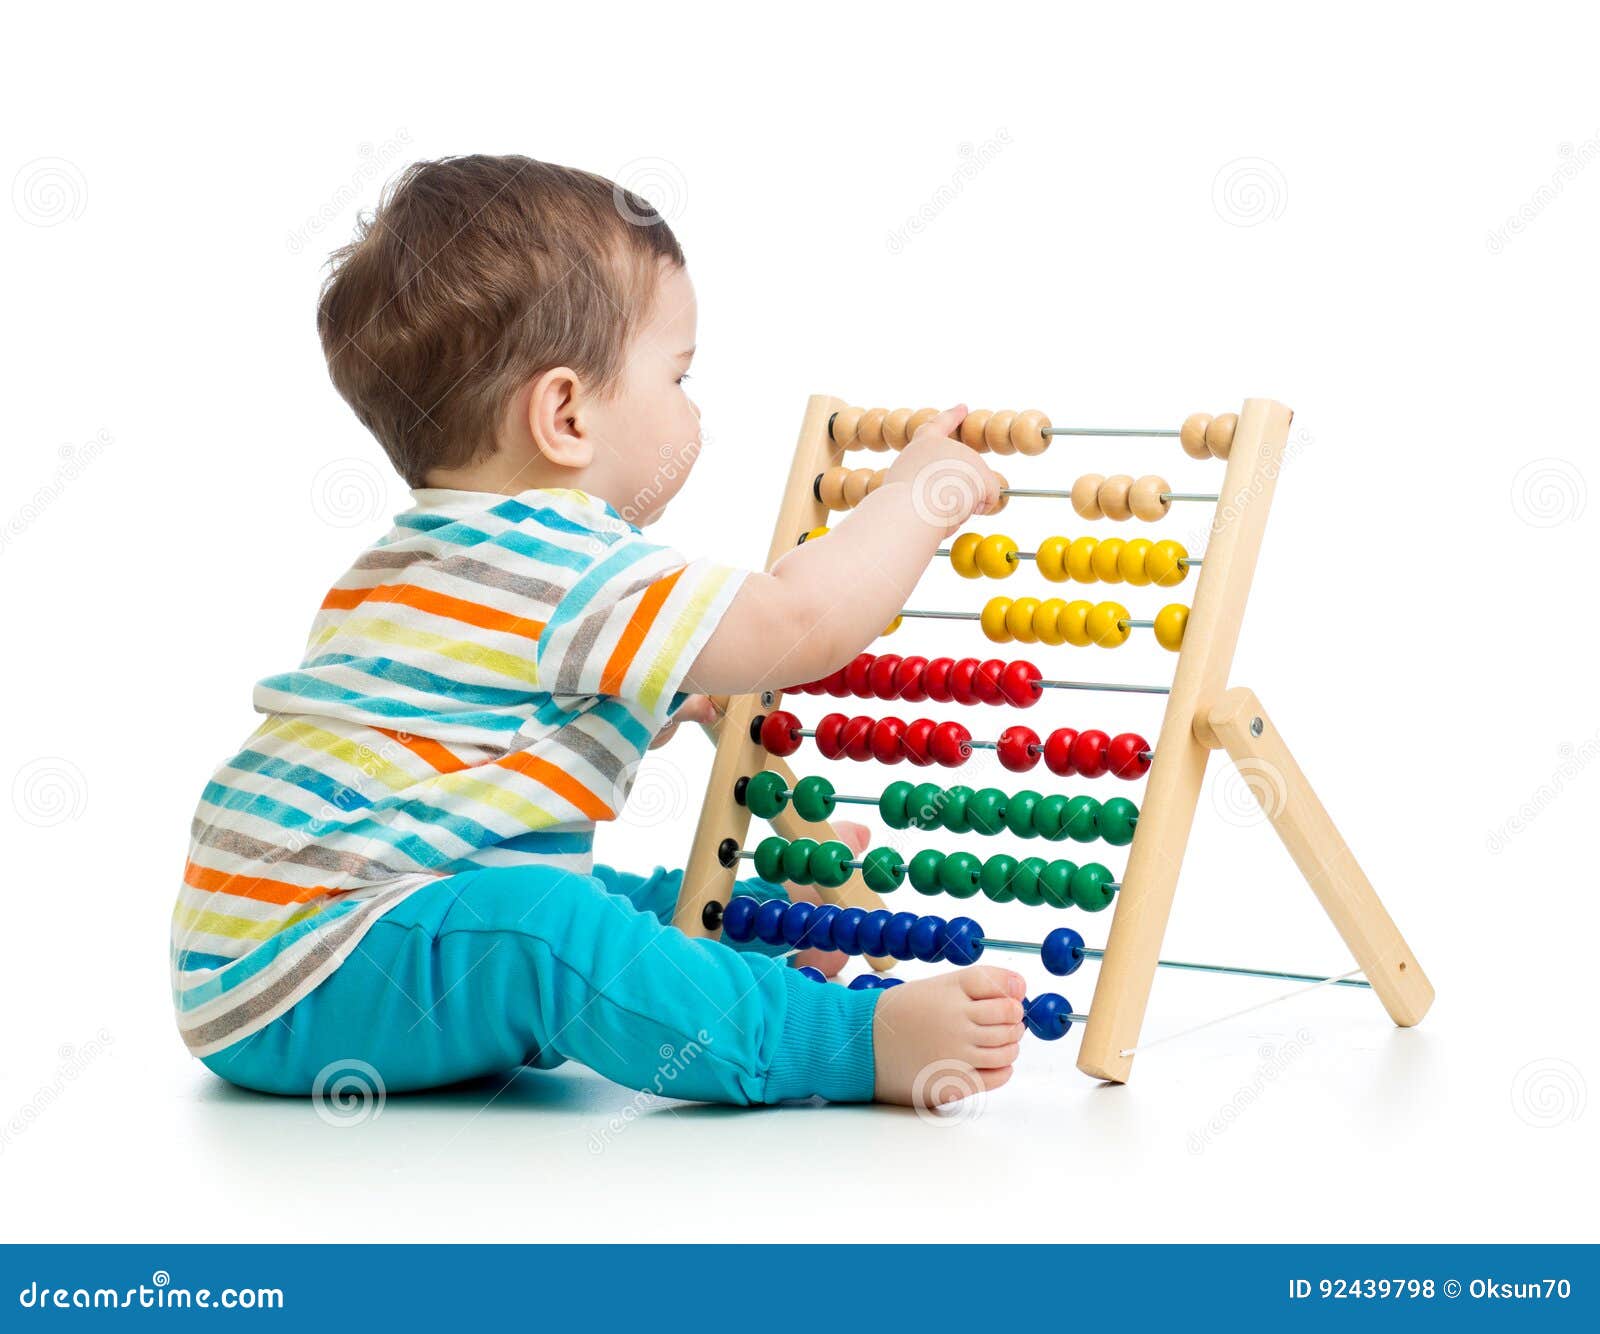 abacus for babies